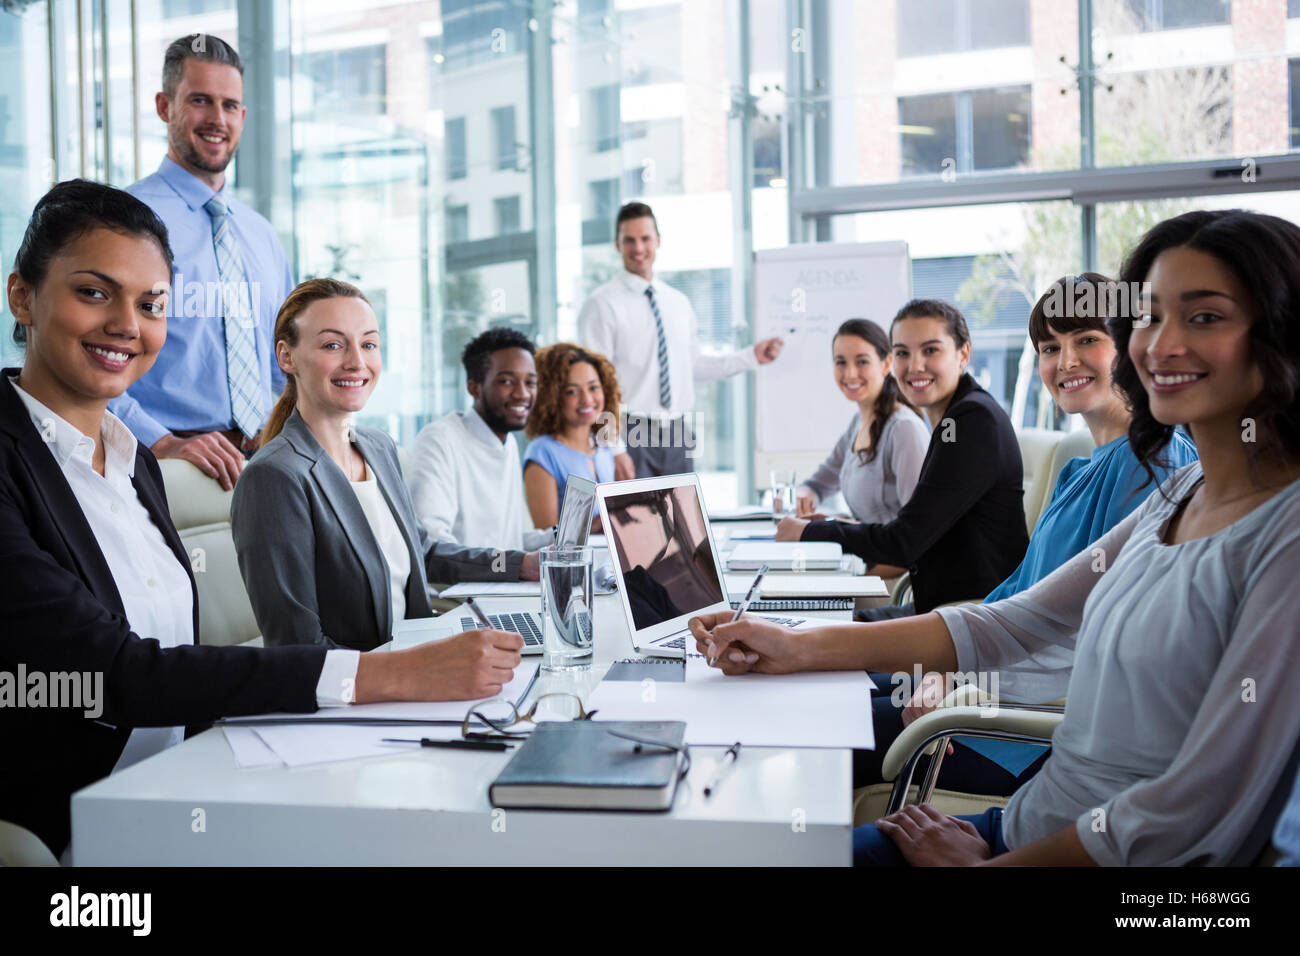 Businesspeople working in office Stock Photo